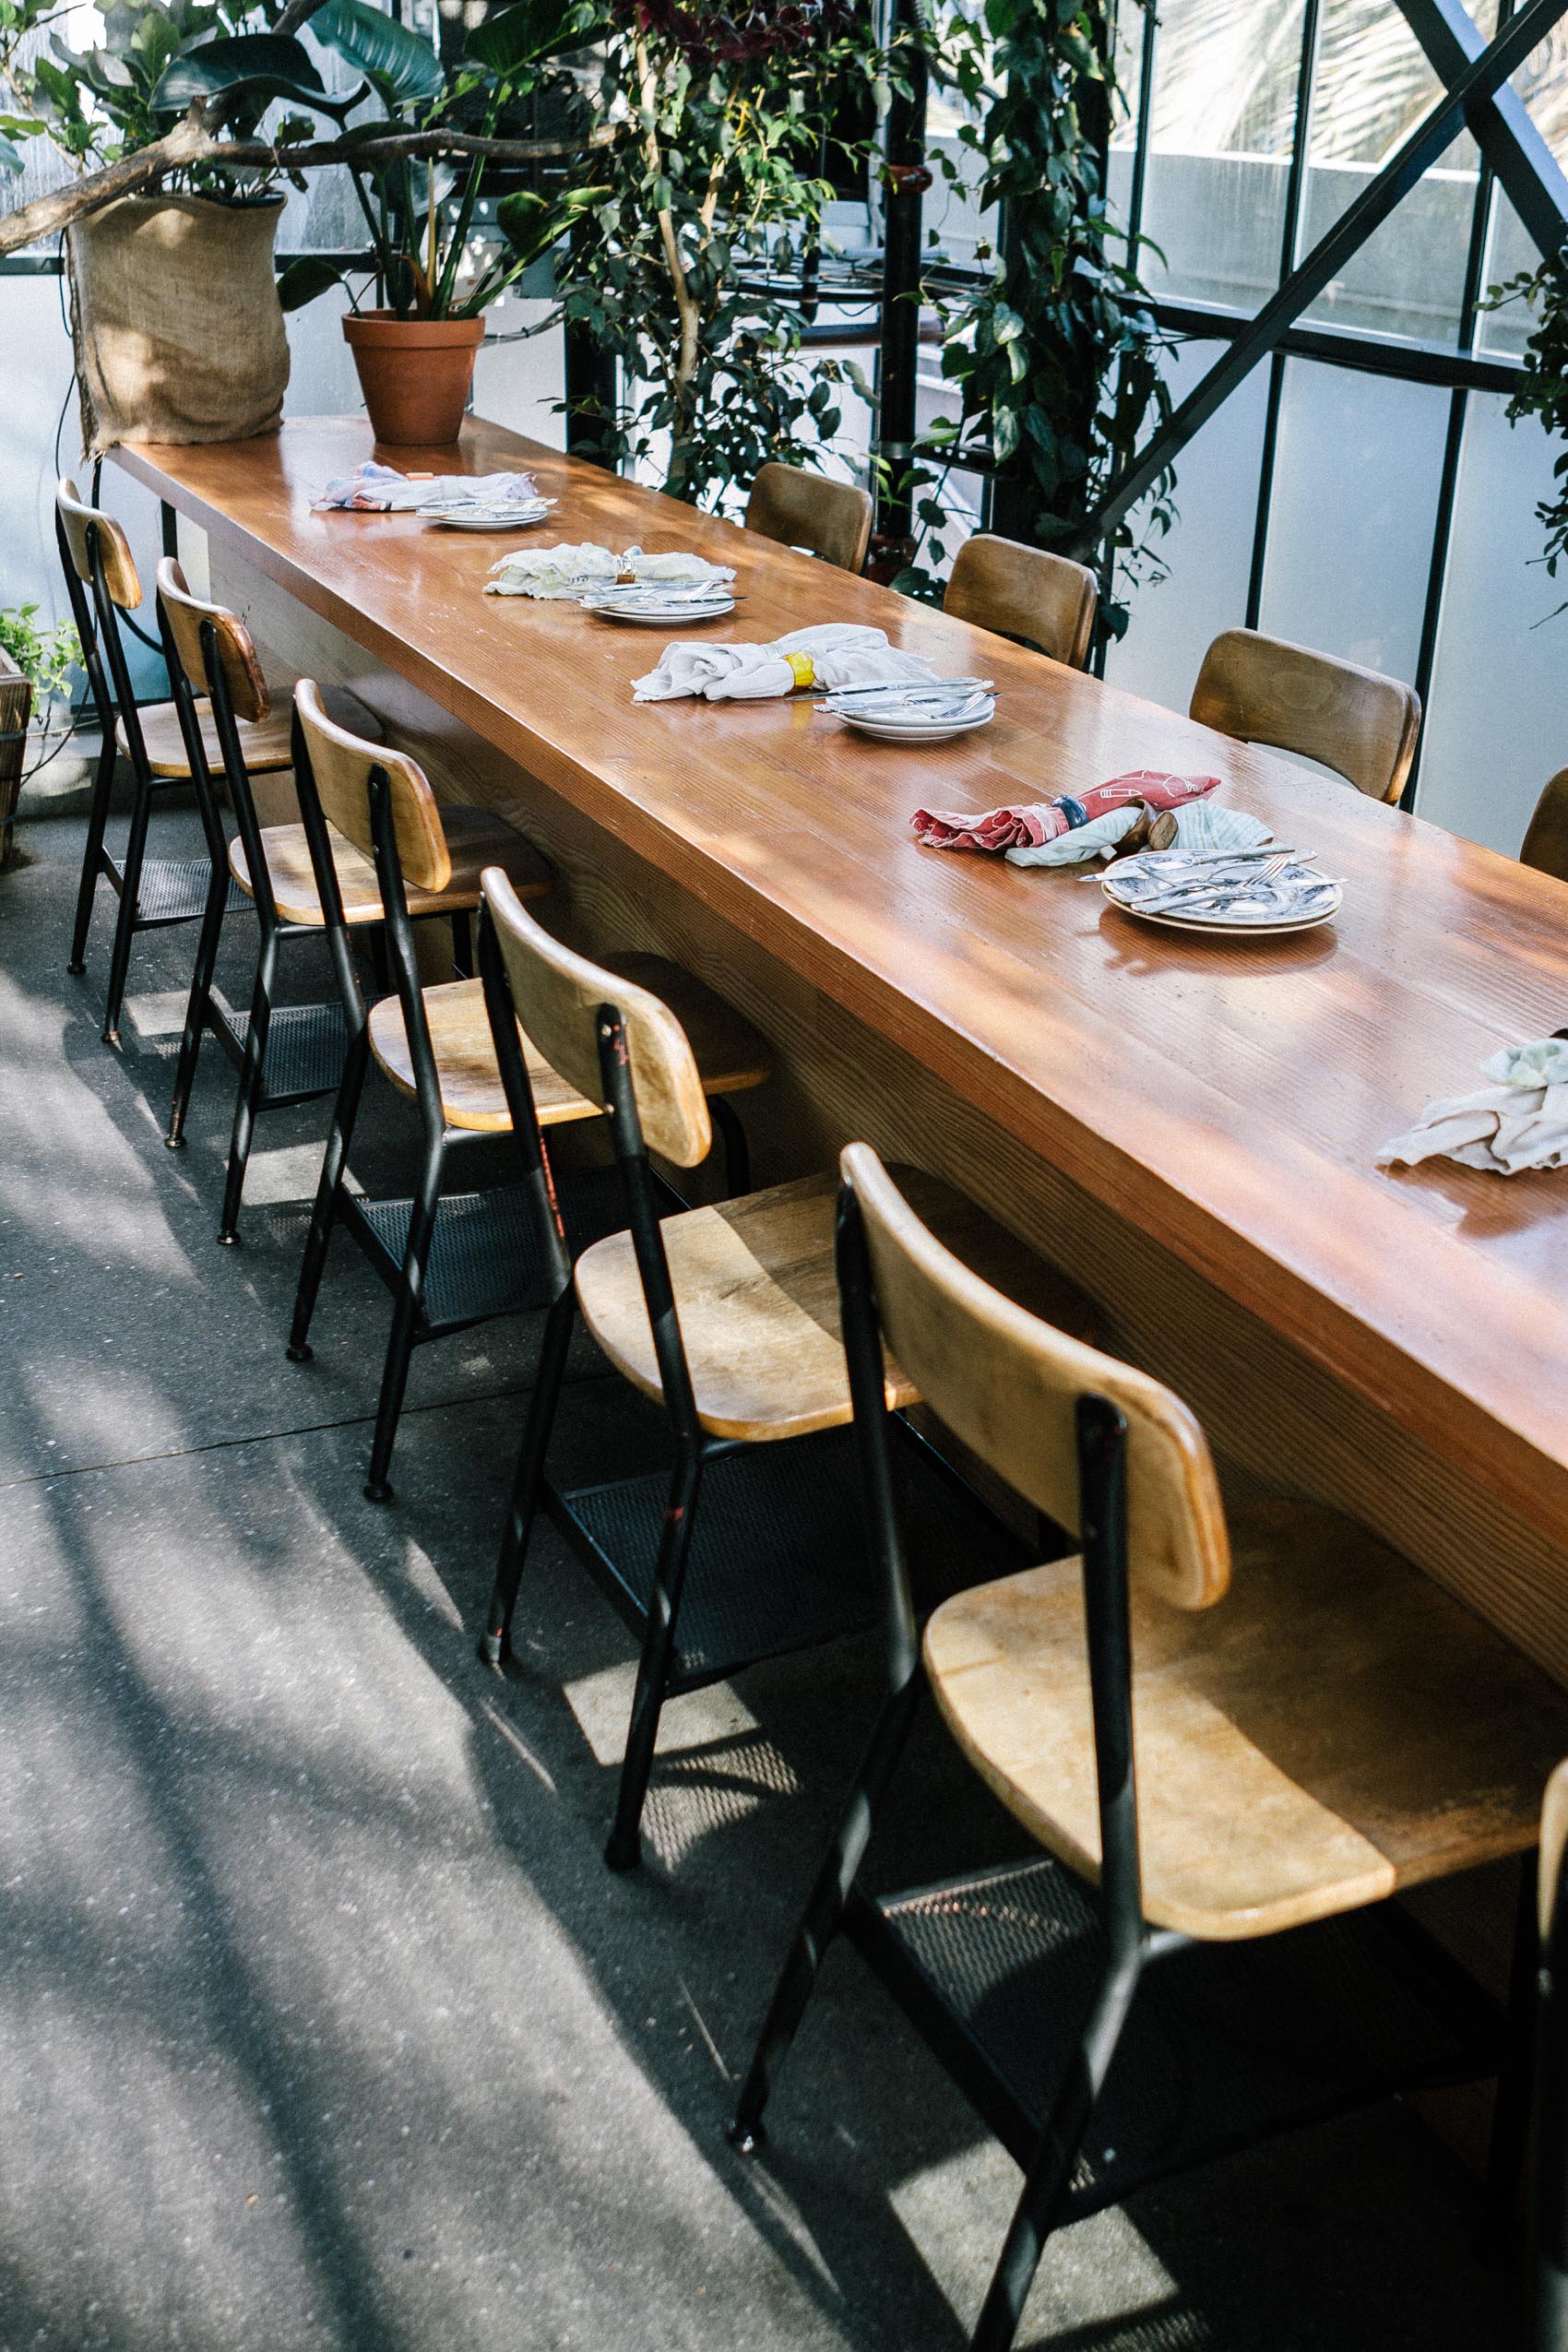 Communal table at Commissary at The Line Hotel in Korea Town Los Angeles